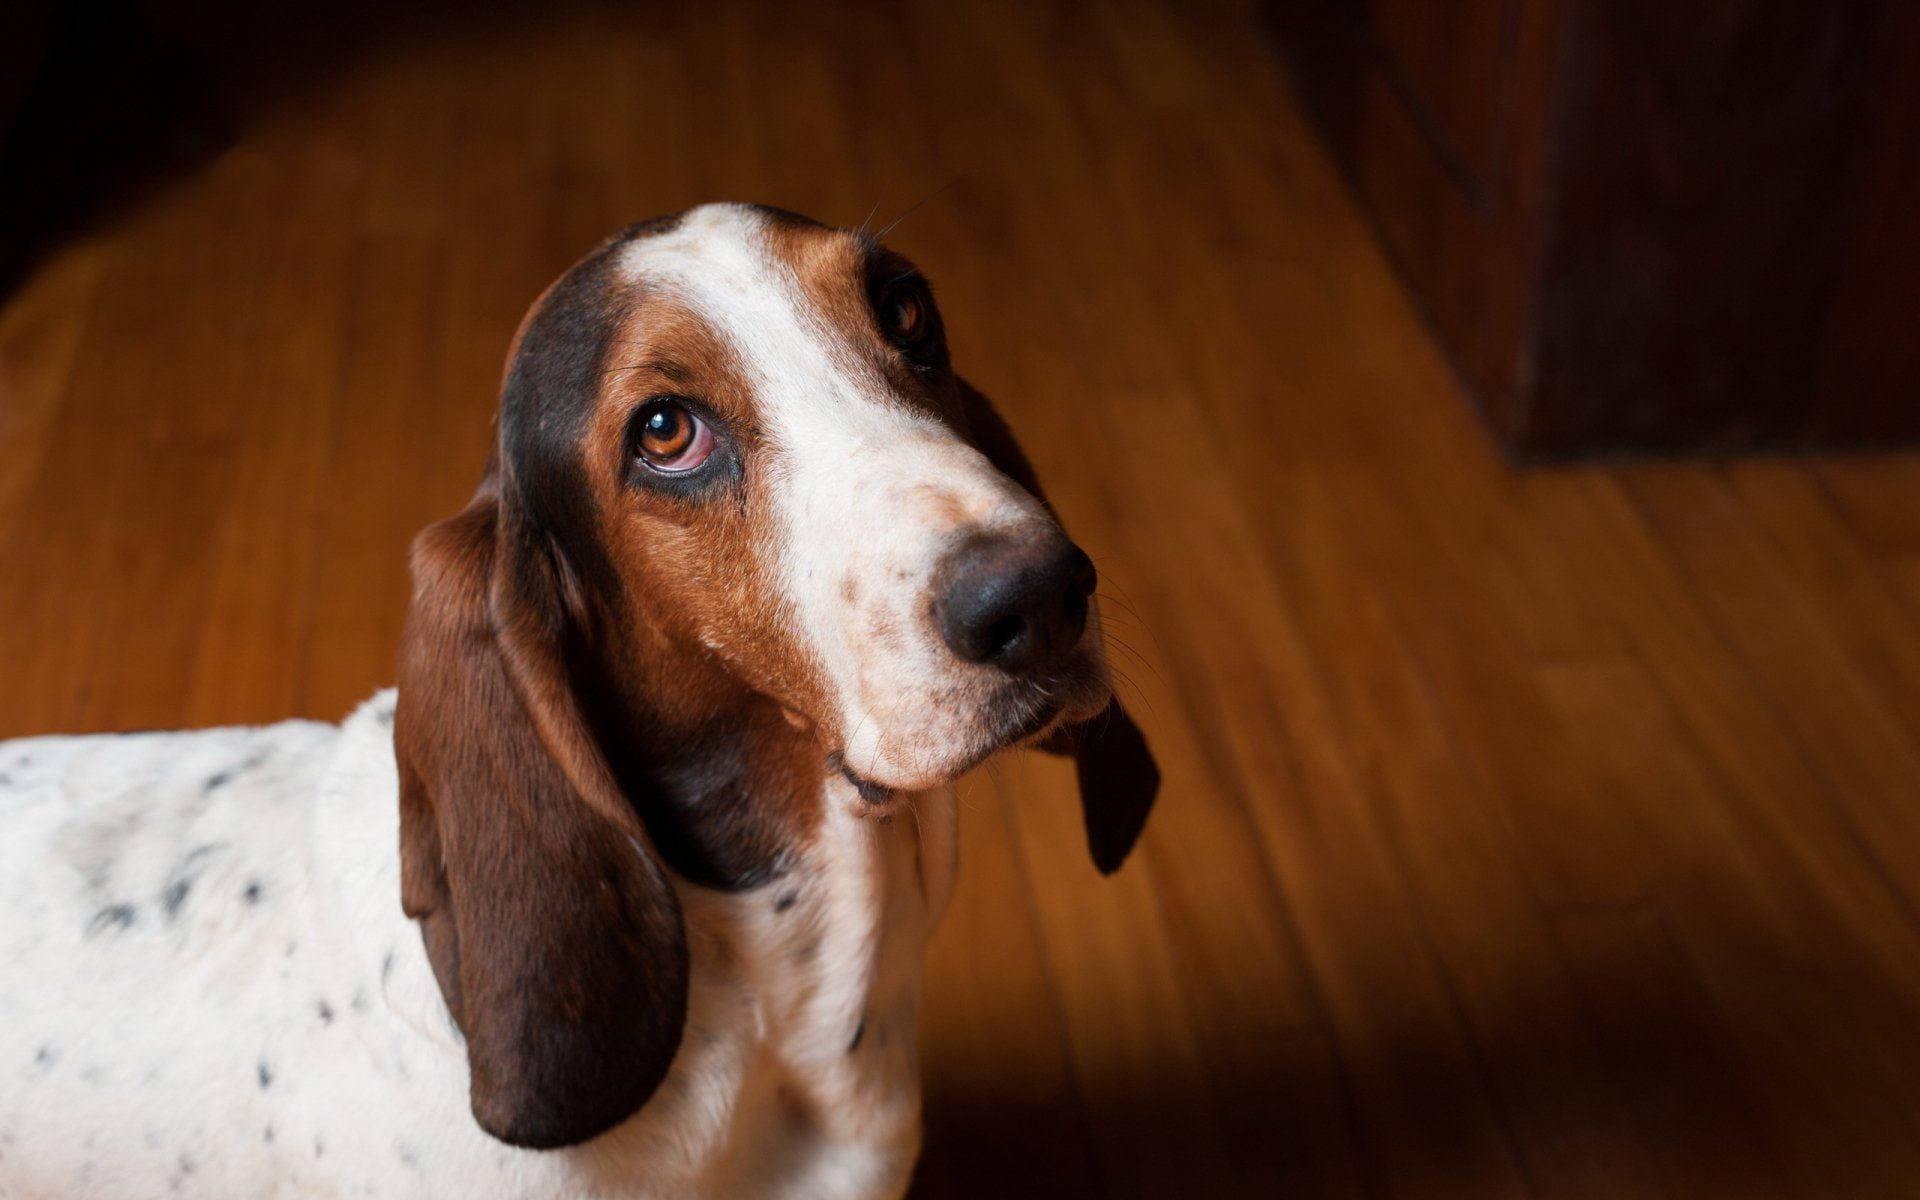 Dogs, Basset Hound, one animal, canine, domestic, domestic animals